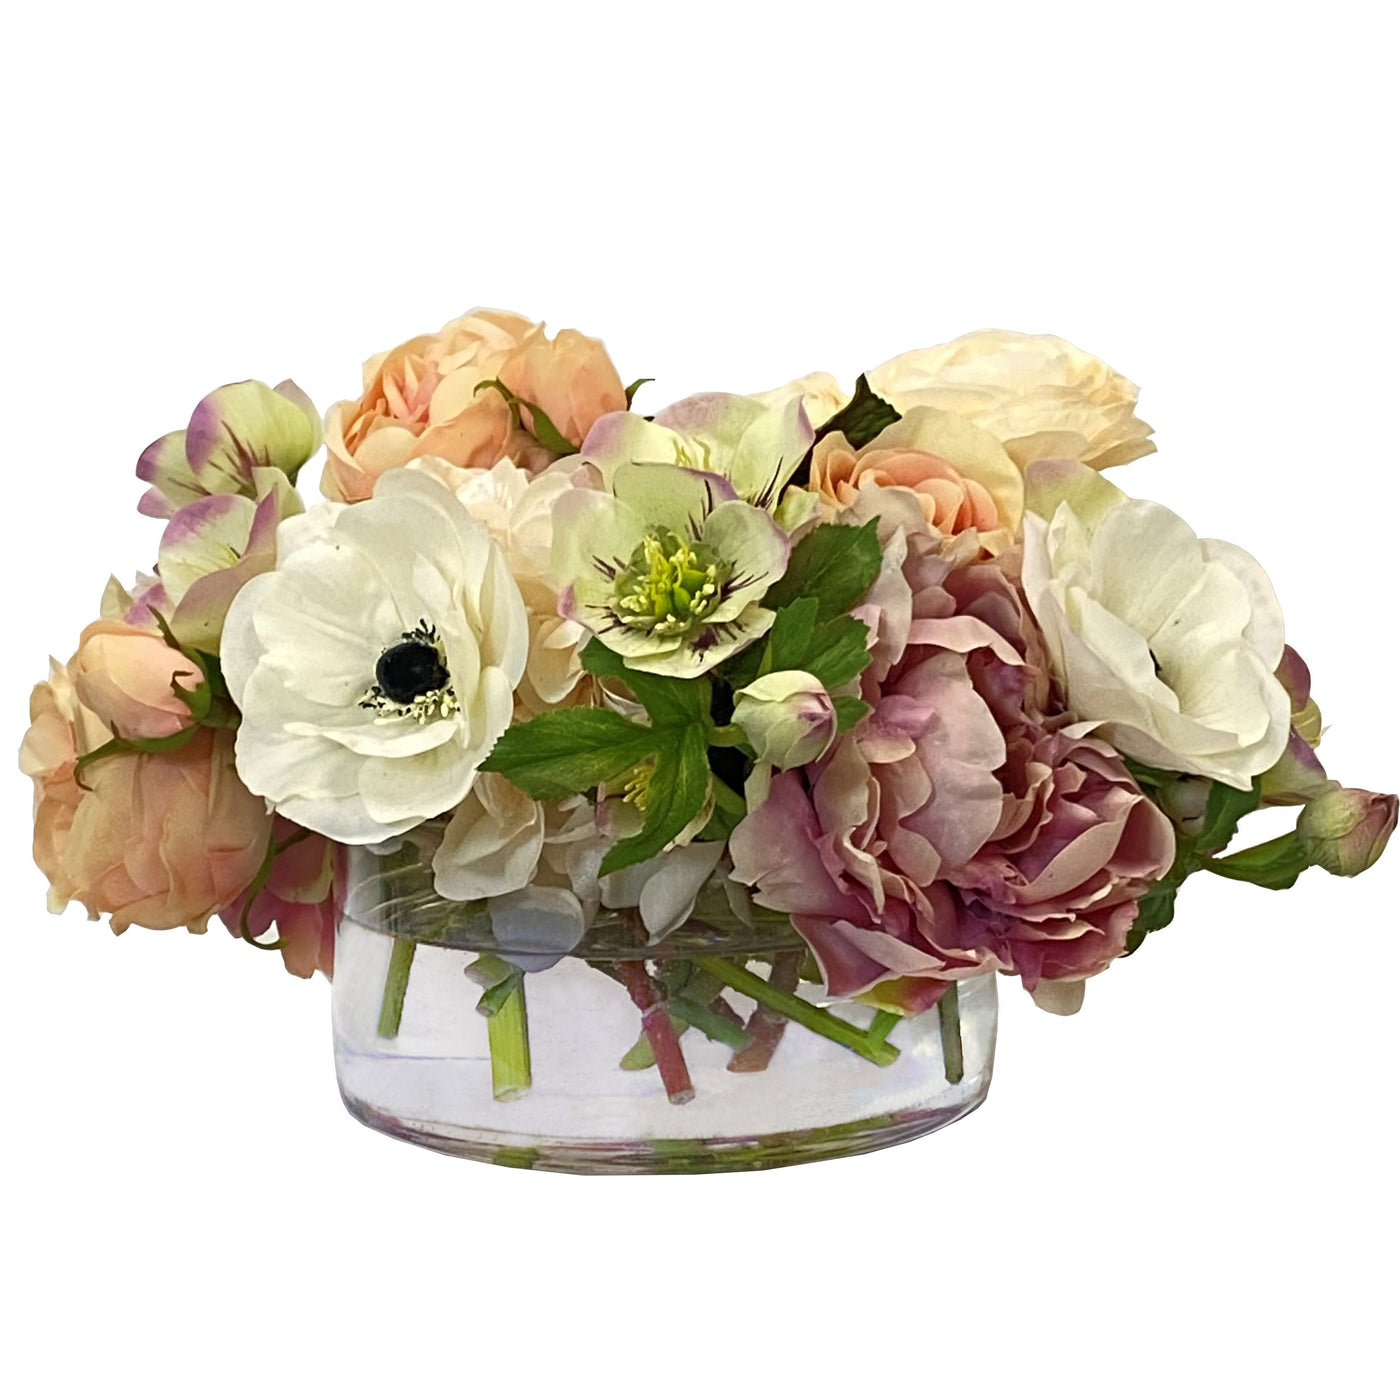 Real Touch luxury faux flower mix arrangement in low-profile glass vase